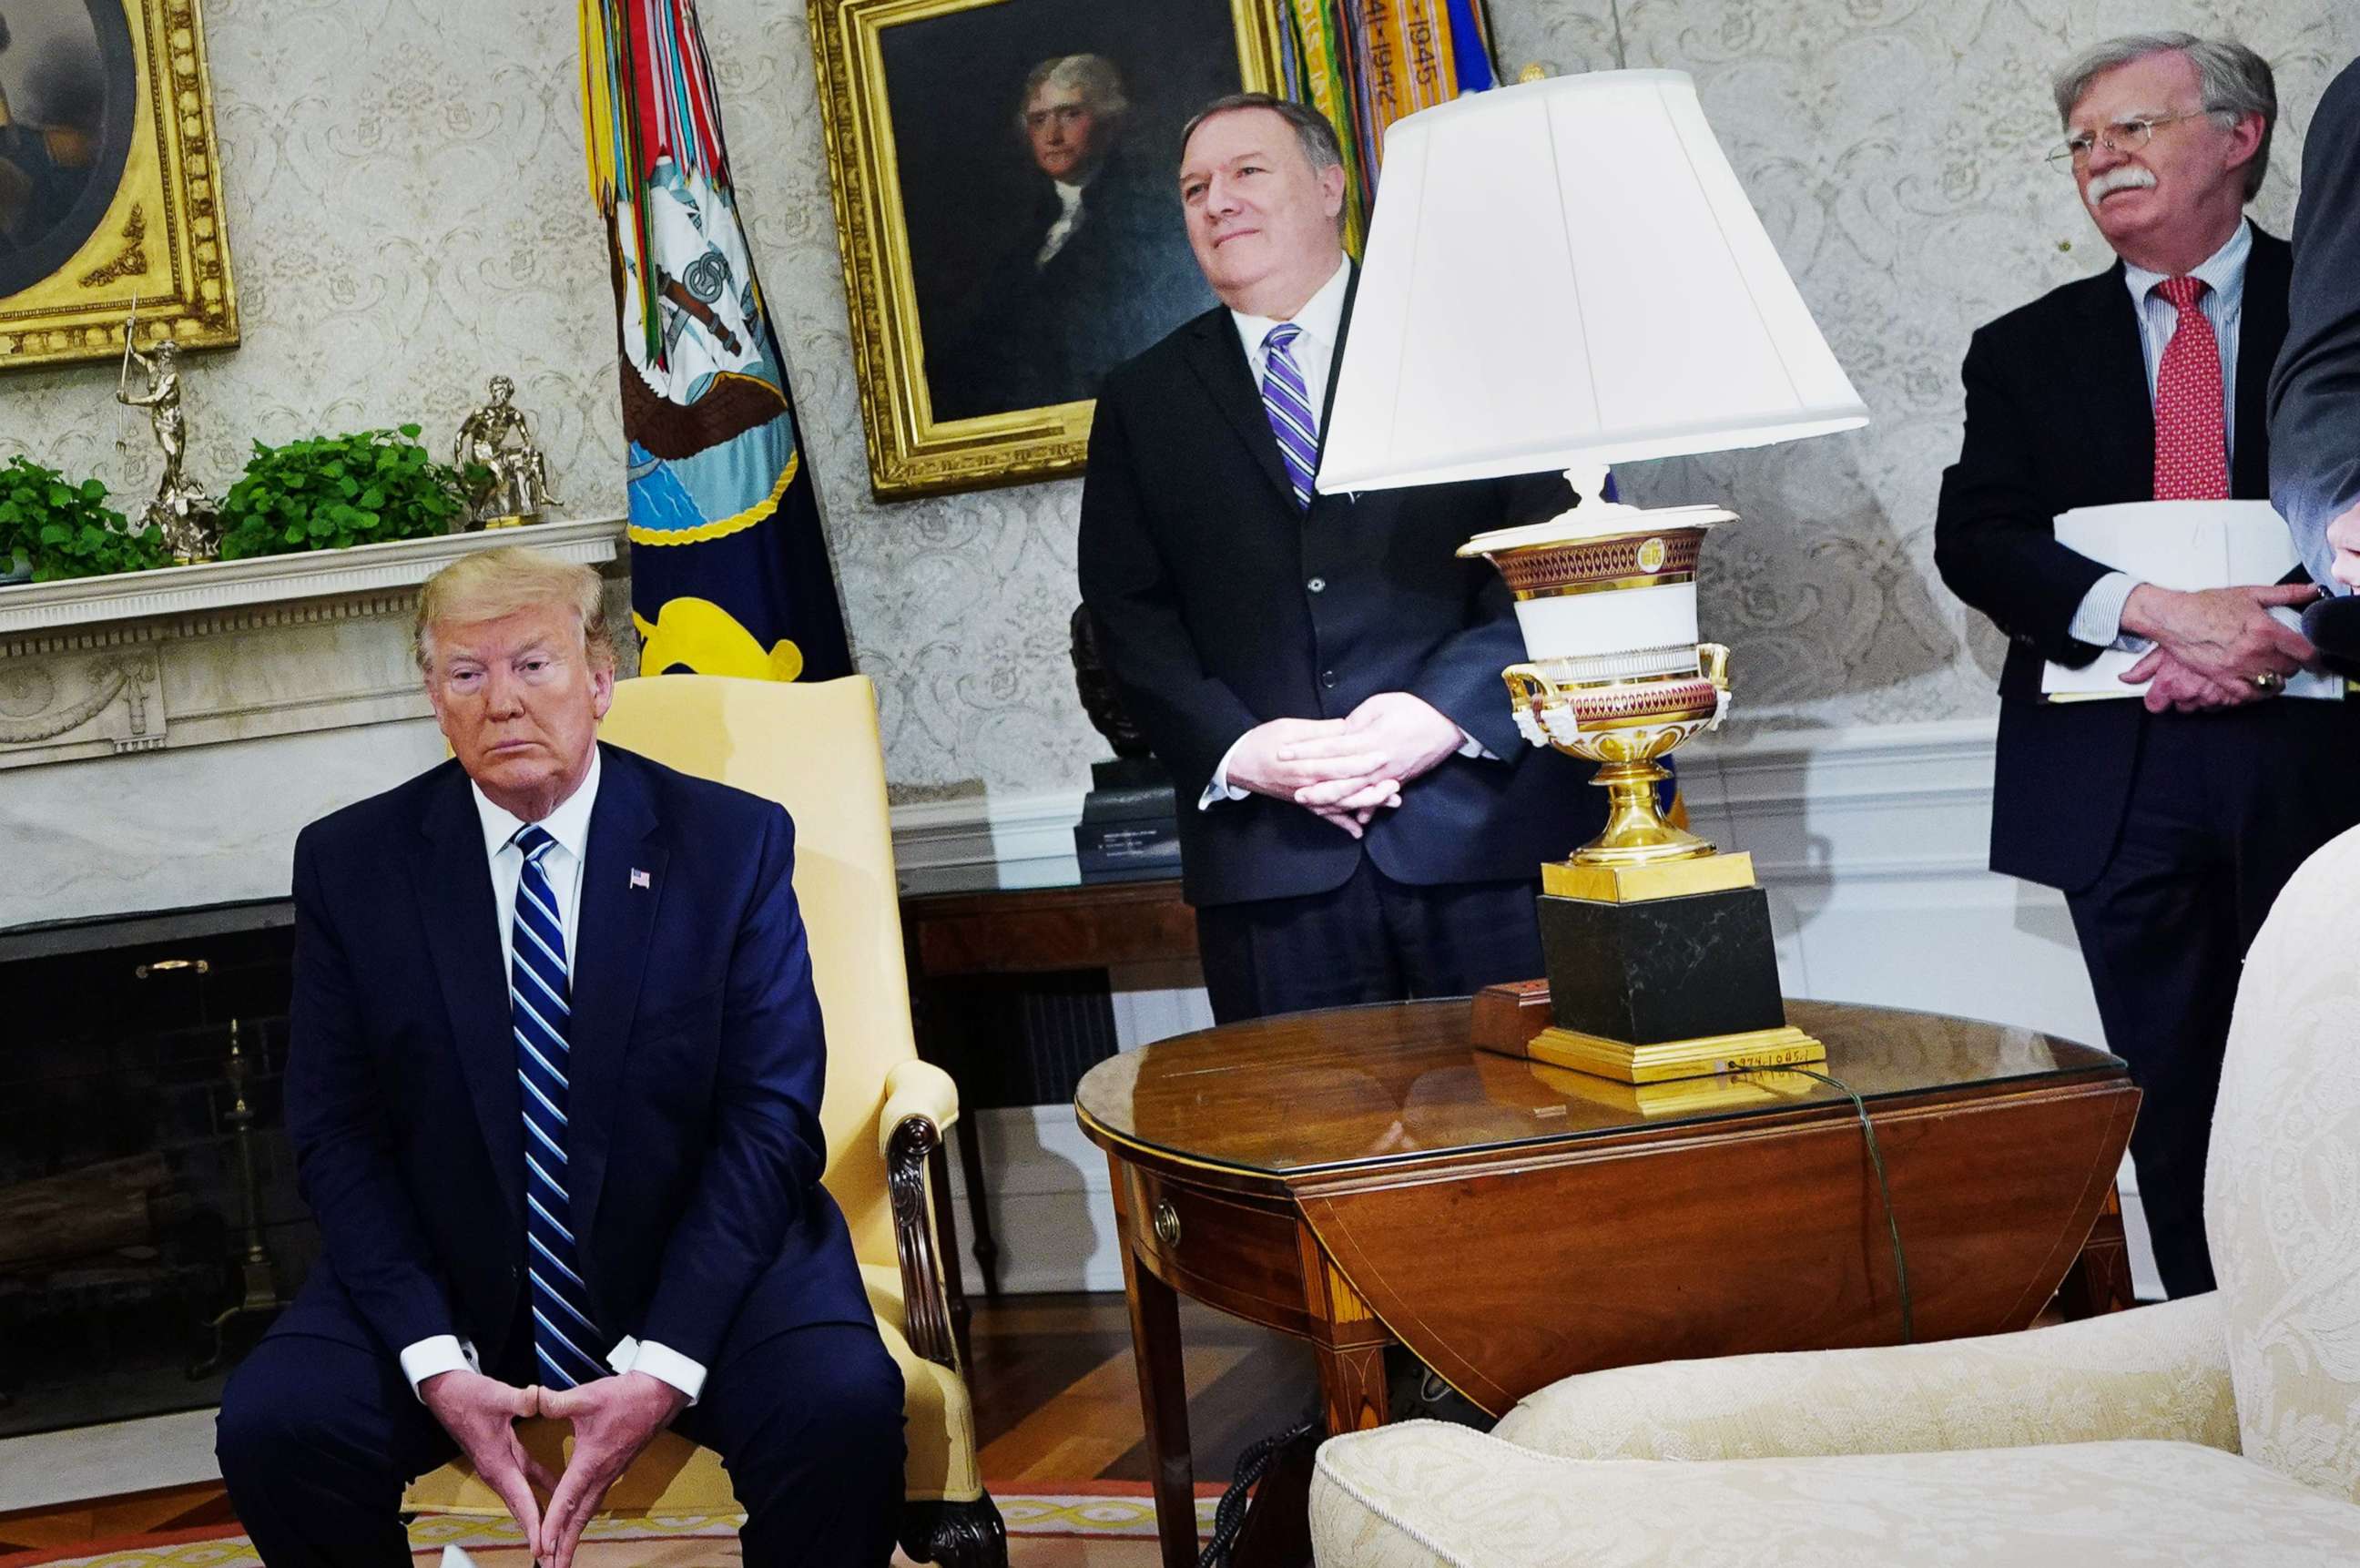 PHOTO: President Donald Trump, Secretary of State Mike Pompeo, and National Security Advisor John Bolton participate in a bilateral meeting with Canada's Prime Minister Justin Trudeau in the Oval Office, June 20, 2019.